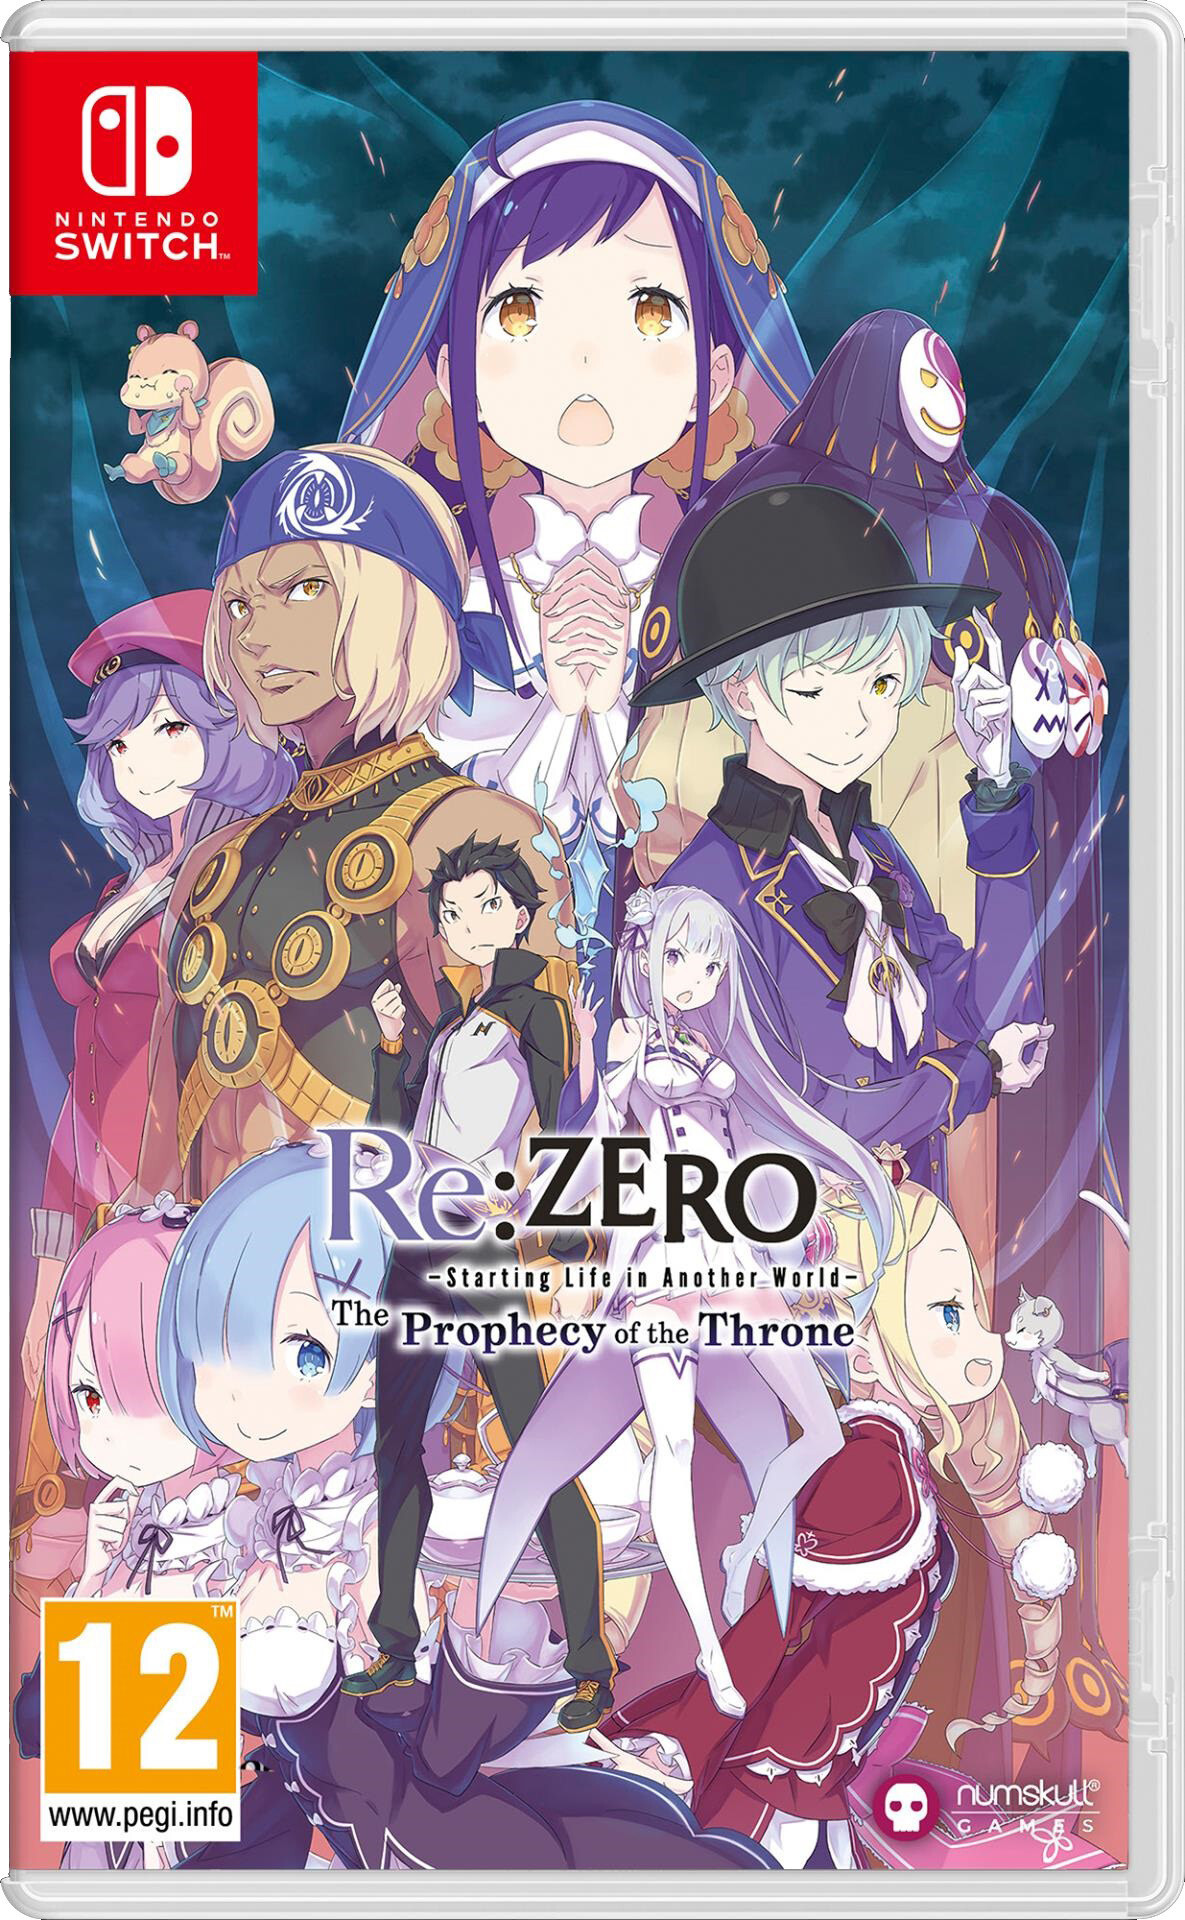 Numskull re:zero starting life in another world: the prophecy of the throne Nintendo Switch